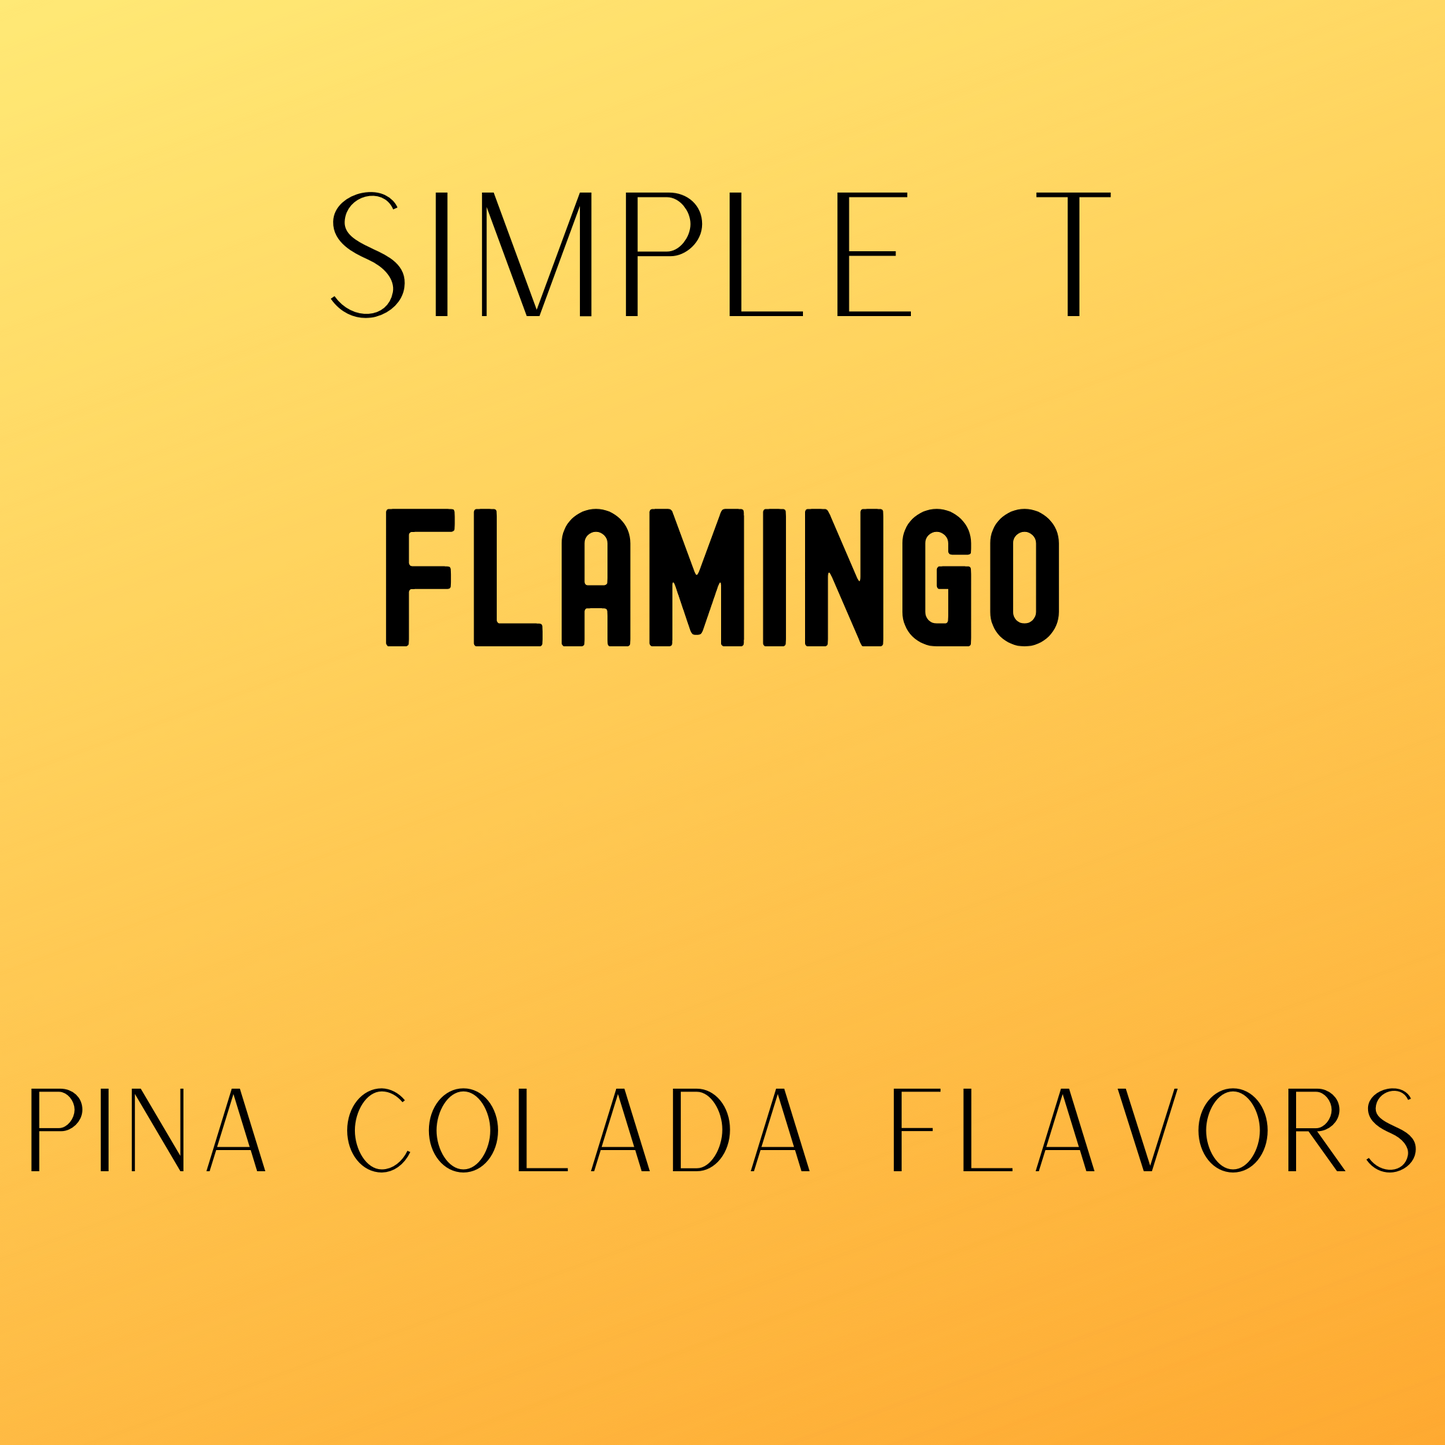 Flamingo Simply T Packets (Pina Colada Lovers)